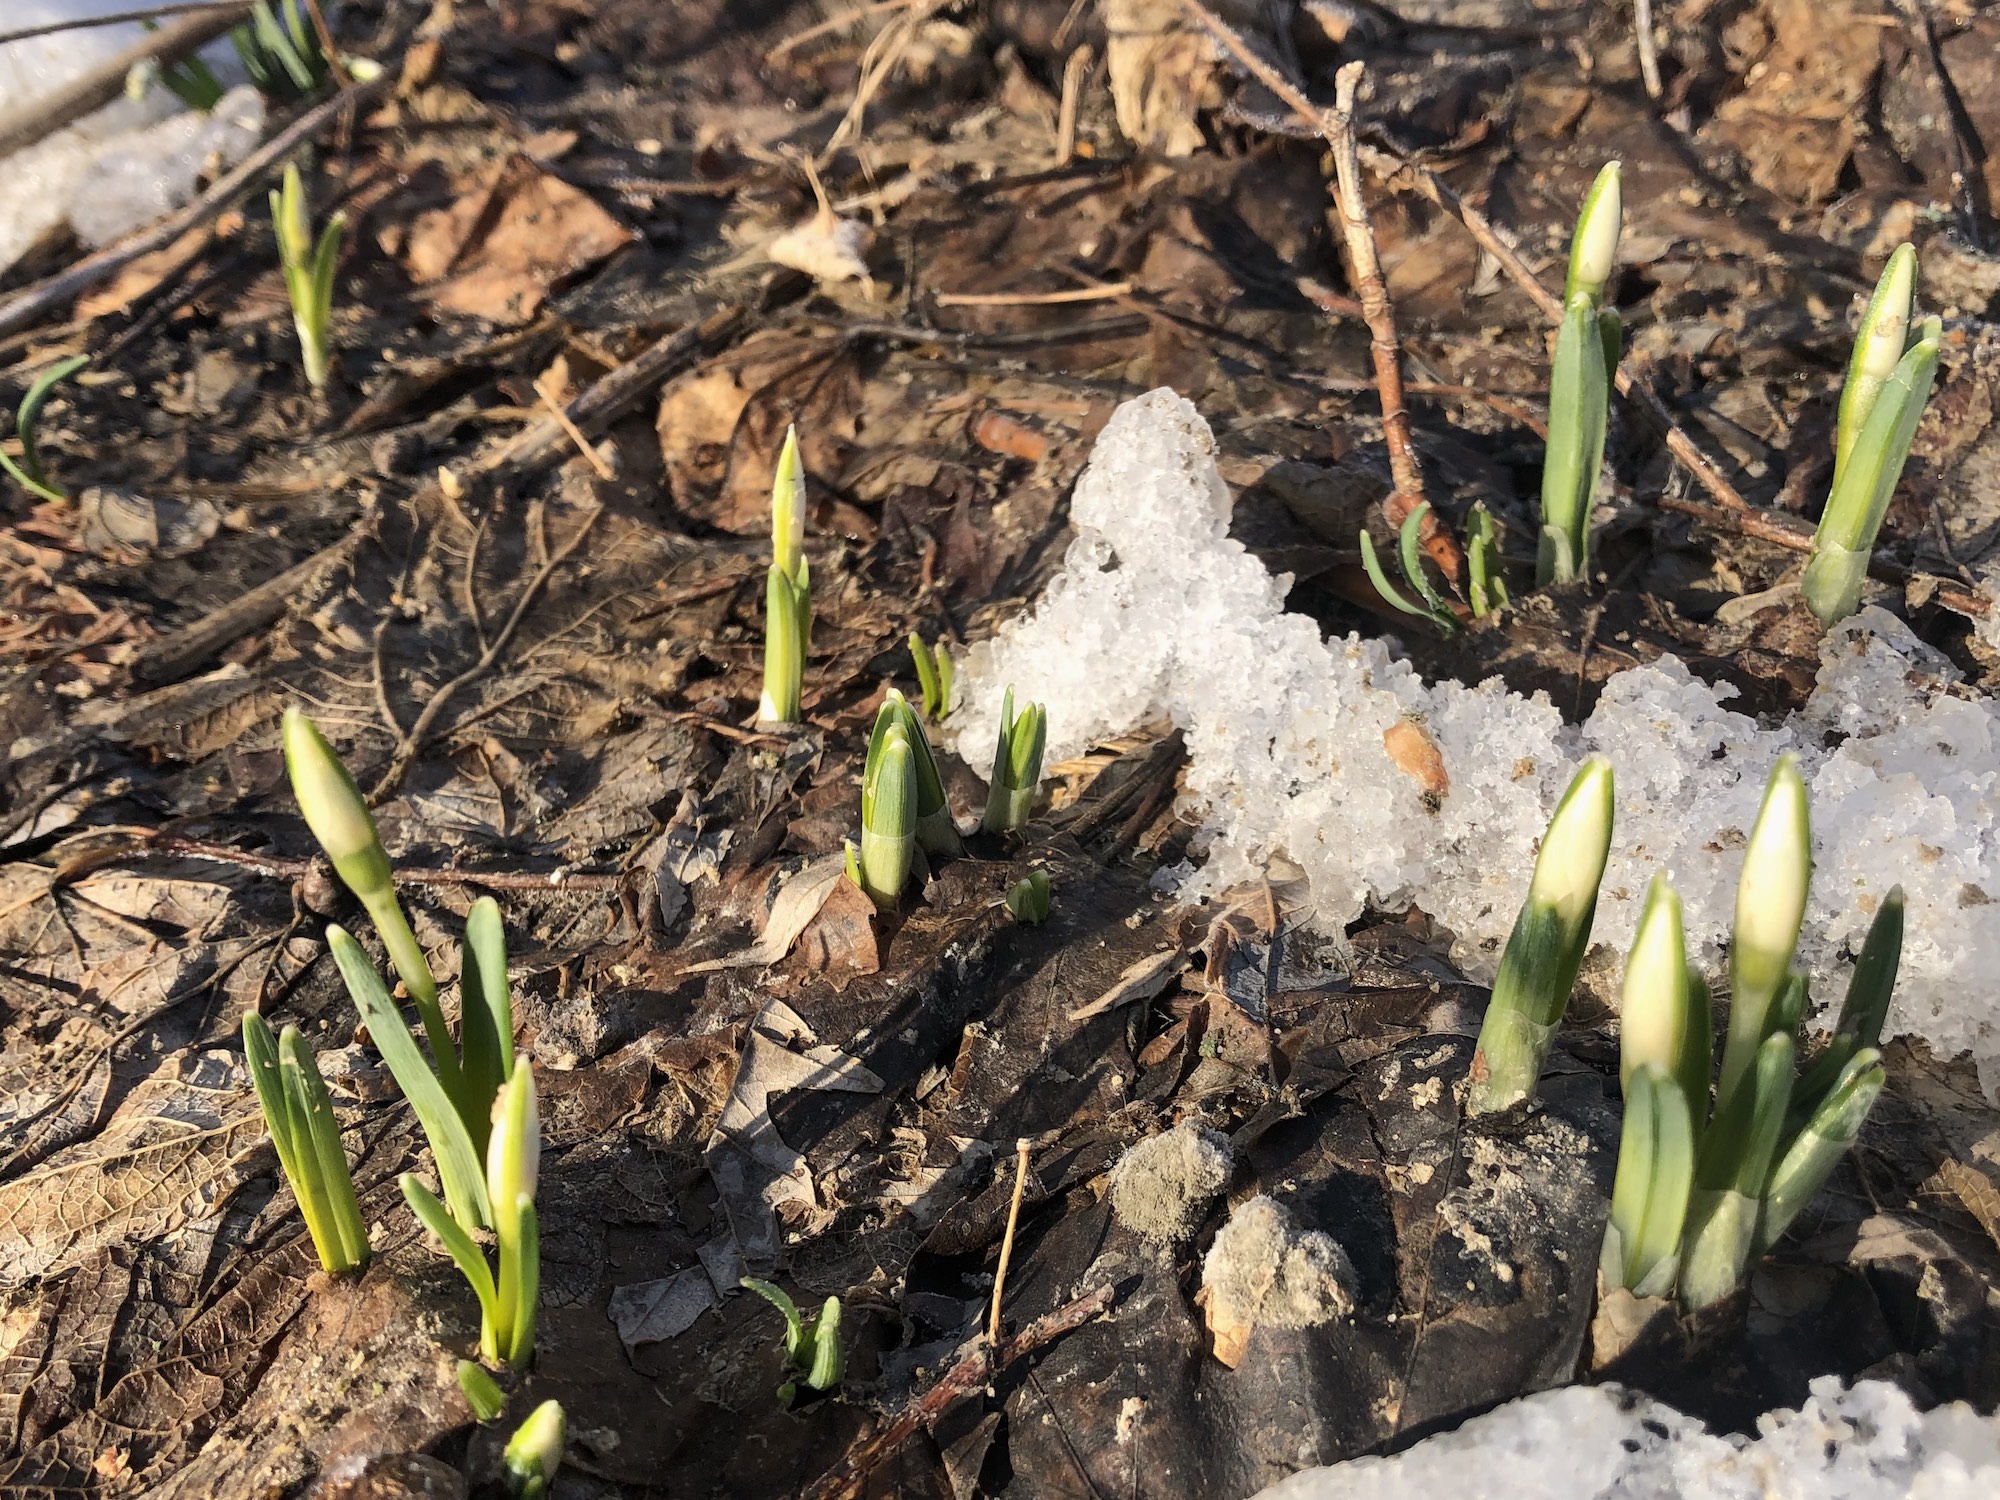 Snowdrops emerging in Madison Wisconsin along Arbor Drive on March 7, 2021.